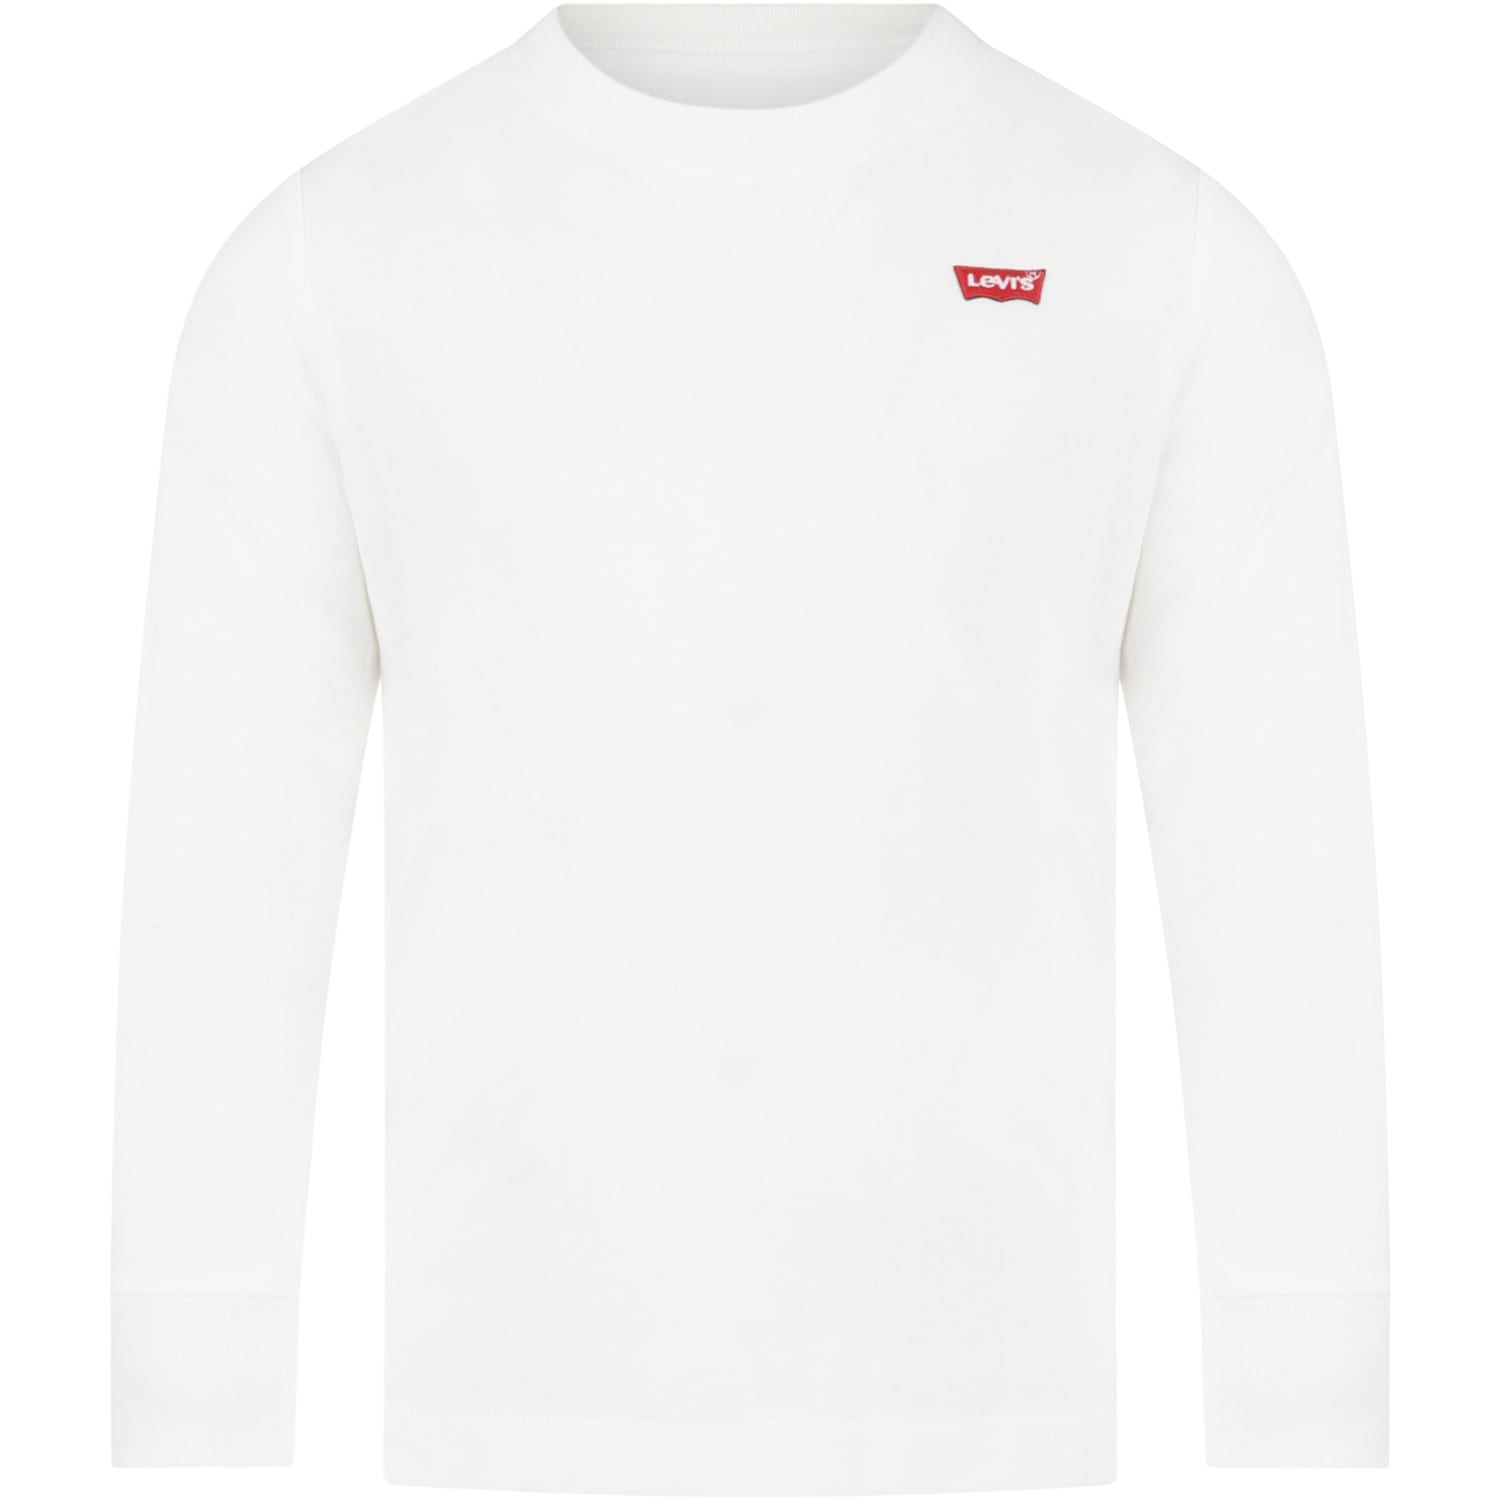 Levis White T-shirt For Kids With Logo